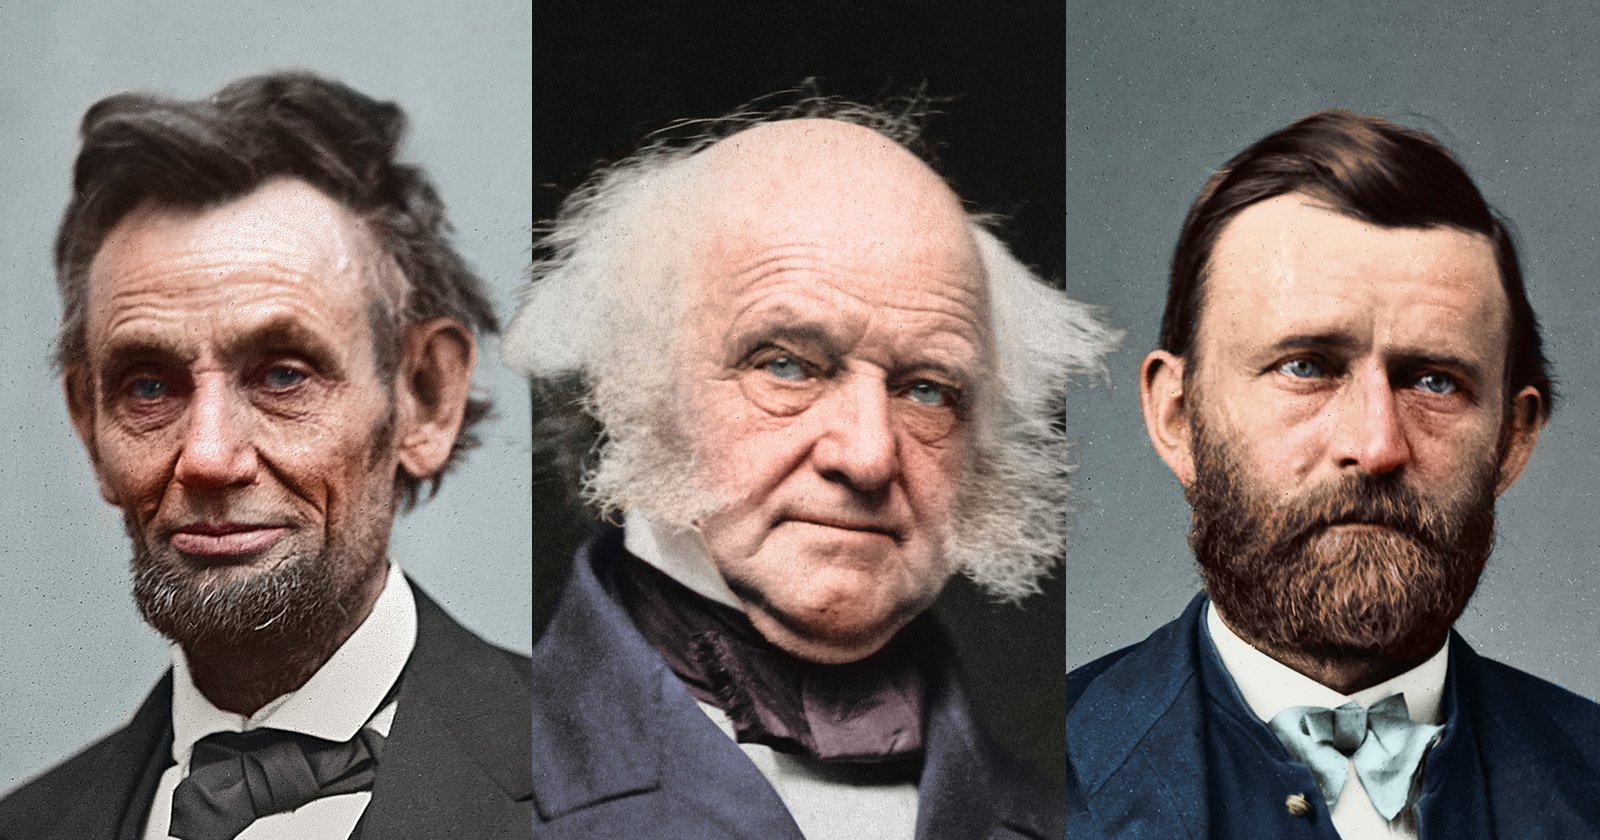 I Restored and Colorized a Portrait of Every President Who Lived Before